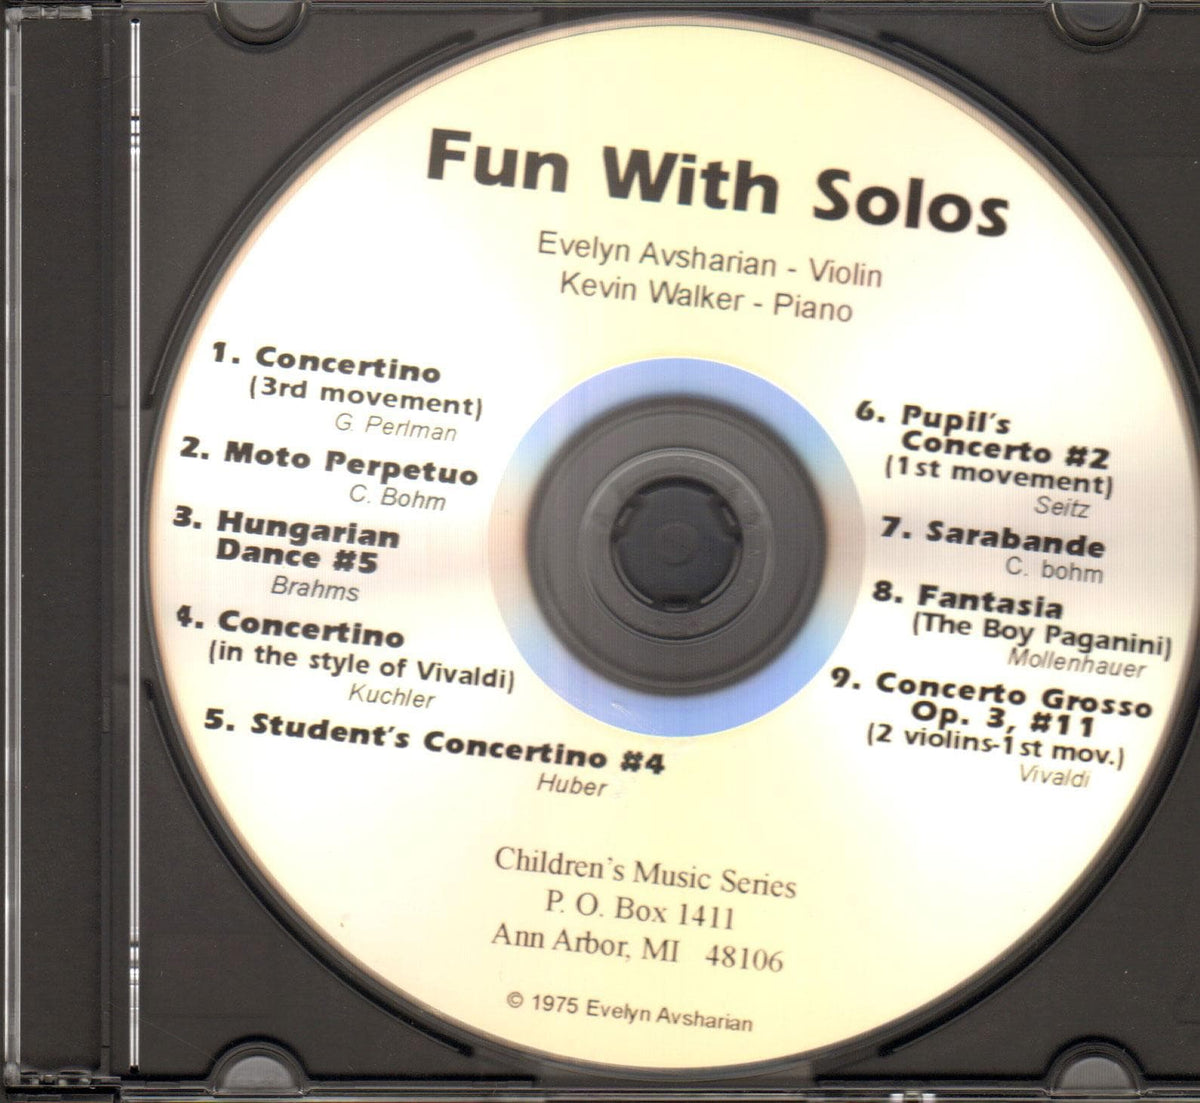 Fun With Solos: Favorite Recital Pieces for 1st and 3rd Positions - Intermediate CD for Violin by Evelyn AvSharian